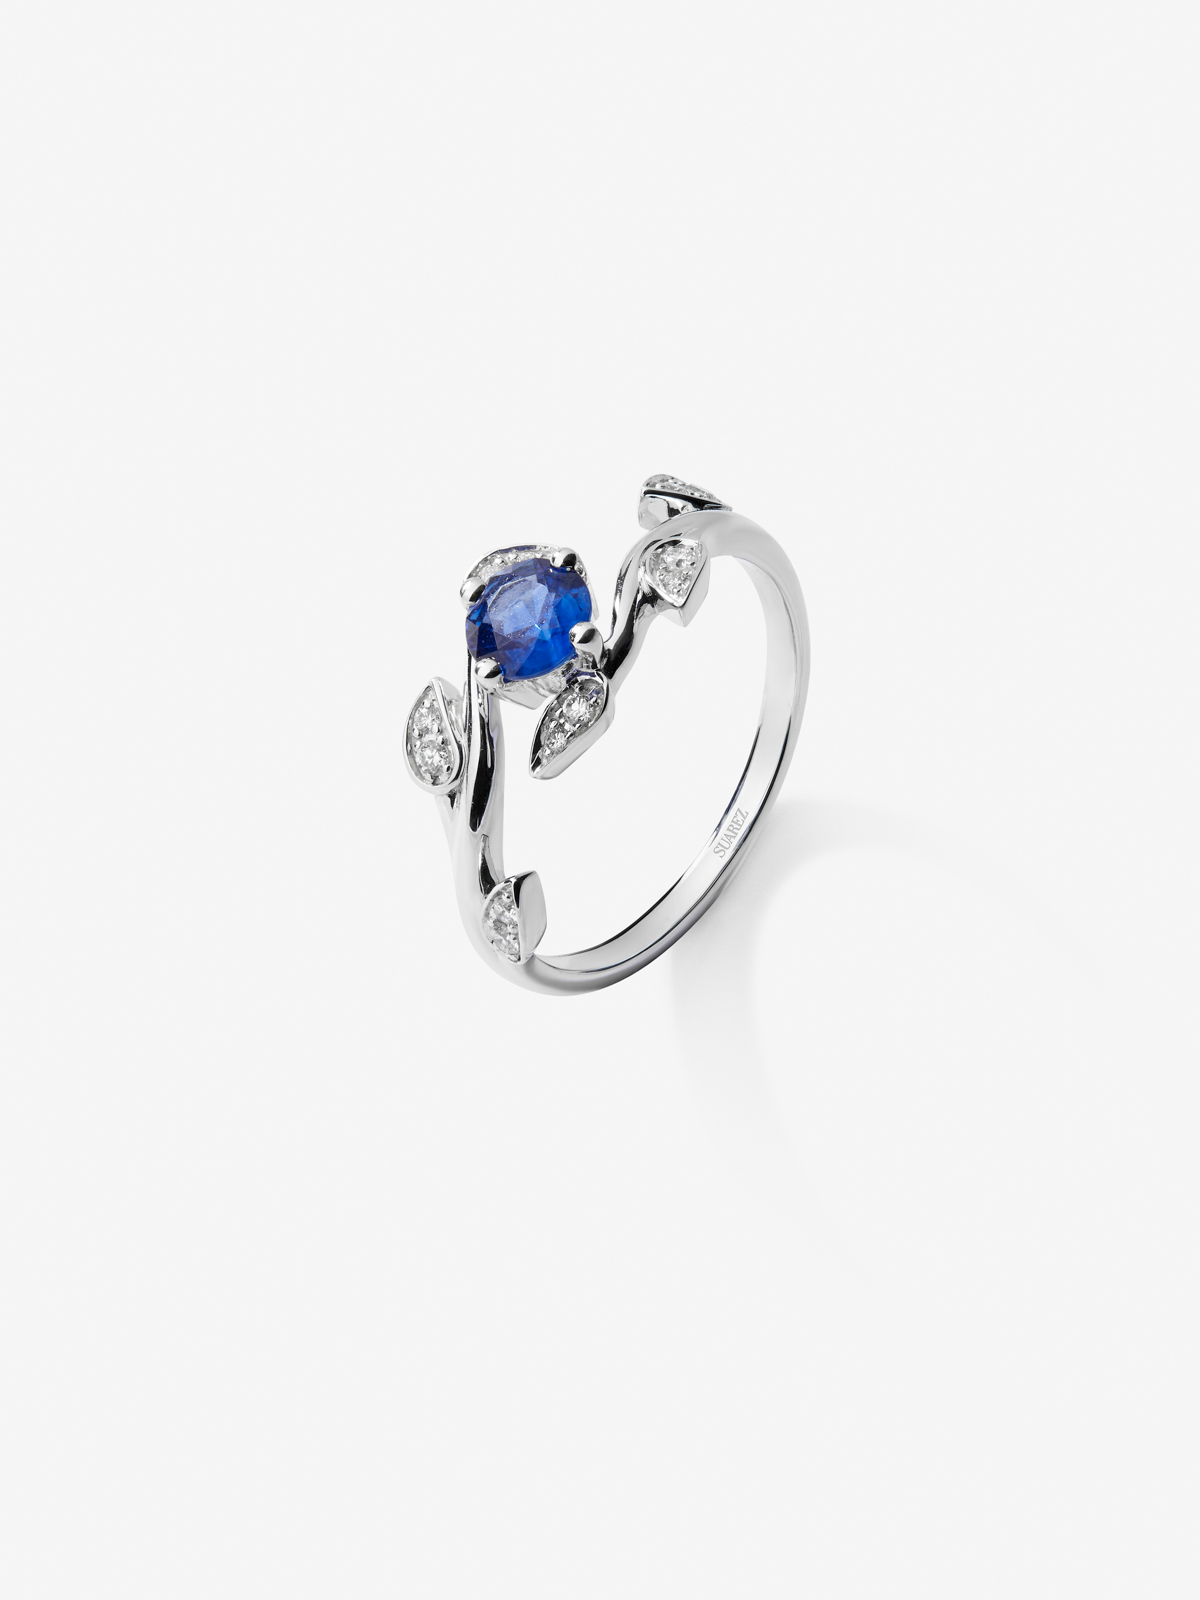 18K White Gold Ring with Blue Sapp